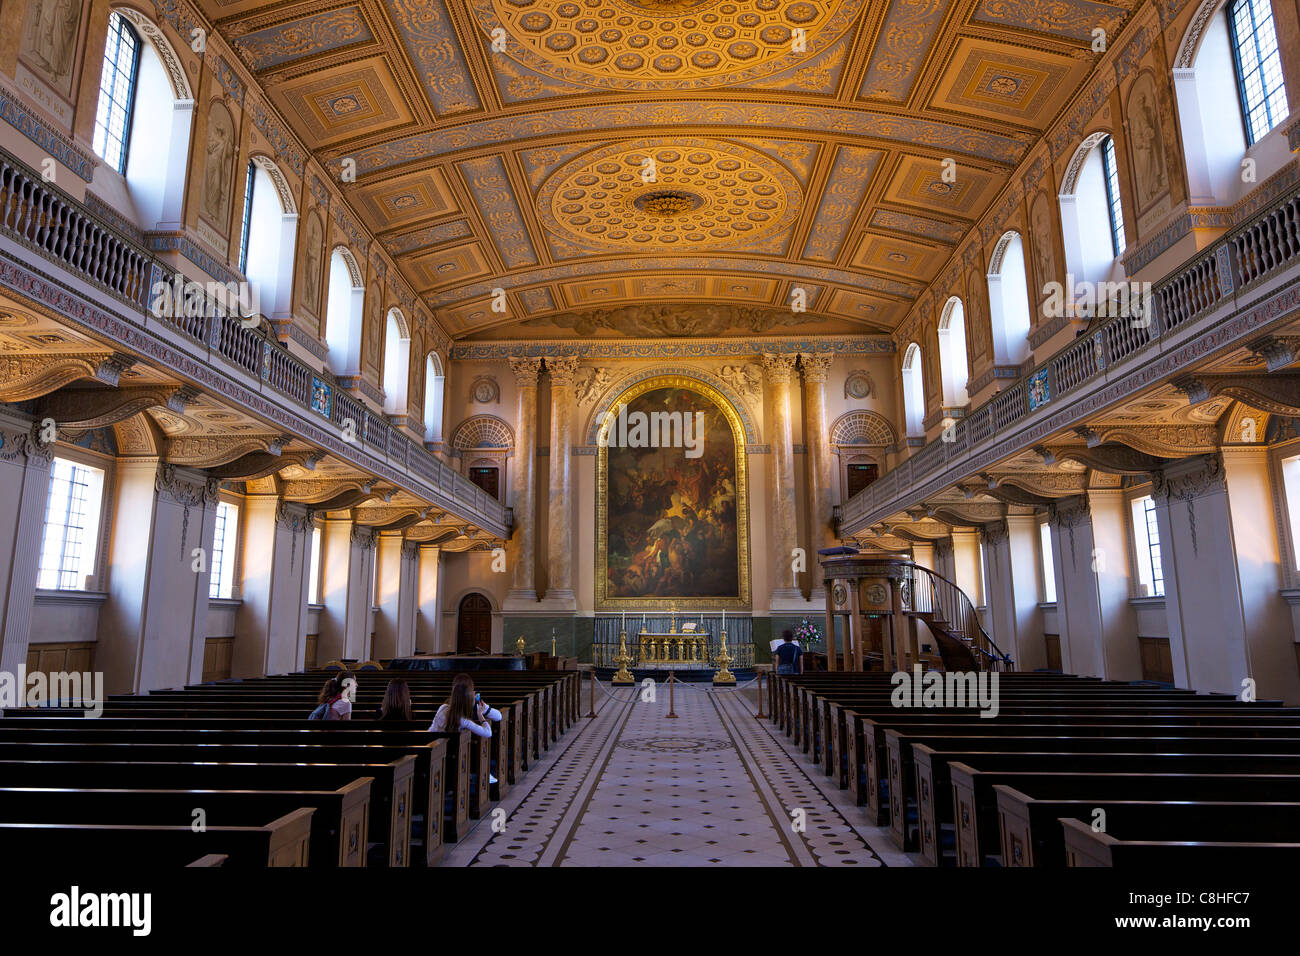 Chapel of St Peter and St Paul, Old Royal Naval College, built by Sir Christopher Wren, Greenwich, London, England, UK, Stock Photo